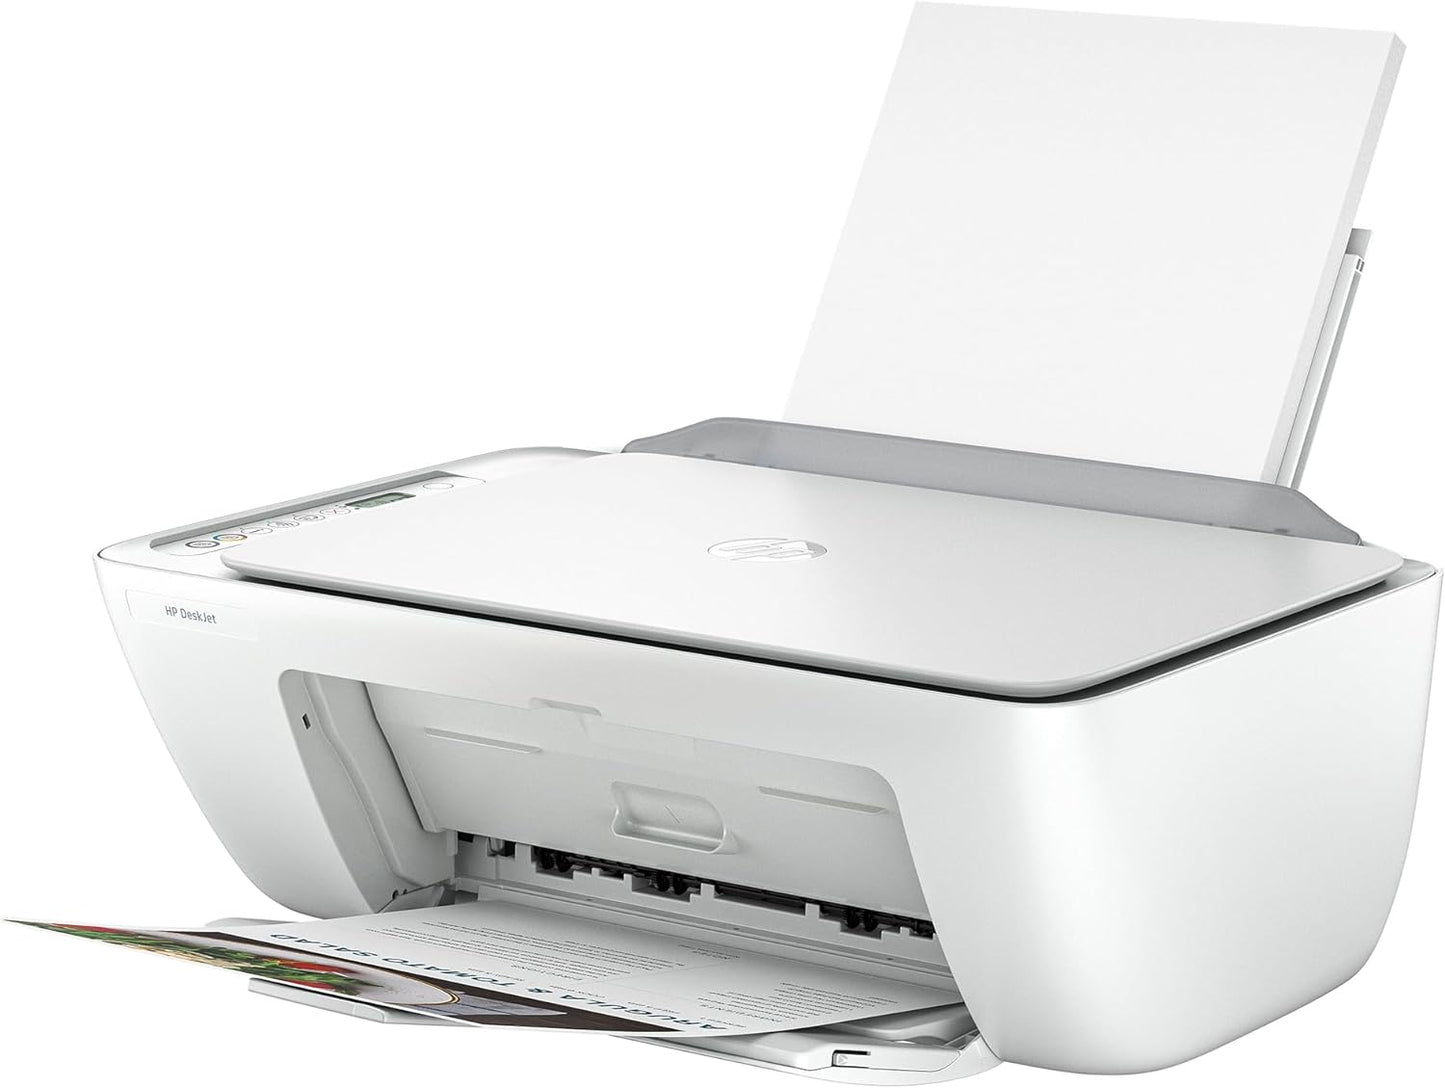 Deskjet 2810E All in One Printer | Perfect for Home | Colour | Wireless | Print, Scan & Copy | 3 Months of Instant Ink Included Easy Setup & Reliable Wi-Fi | White